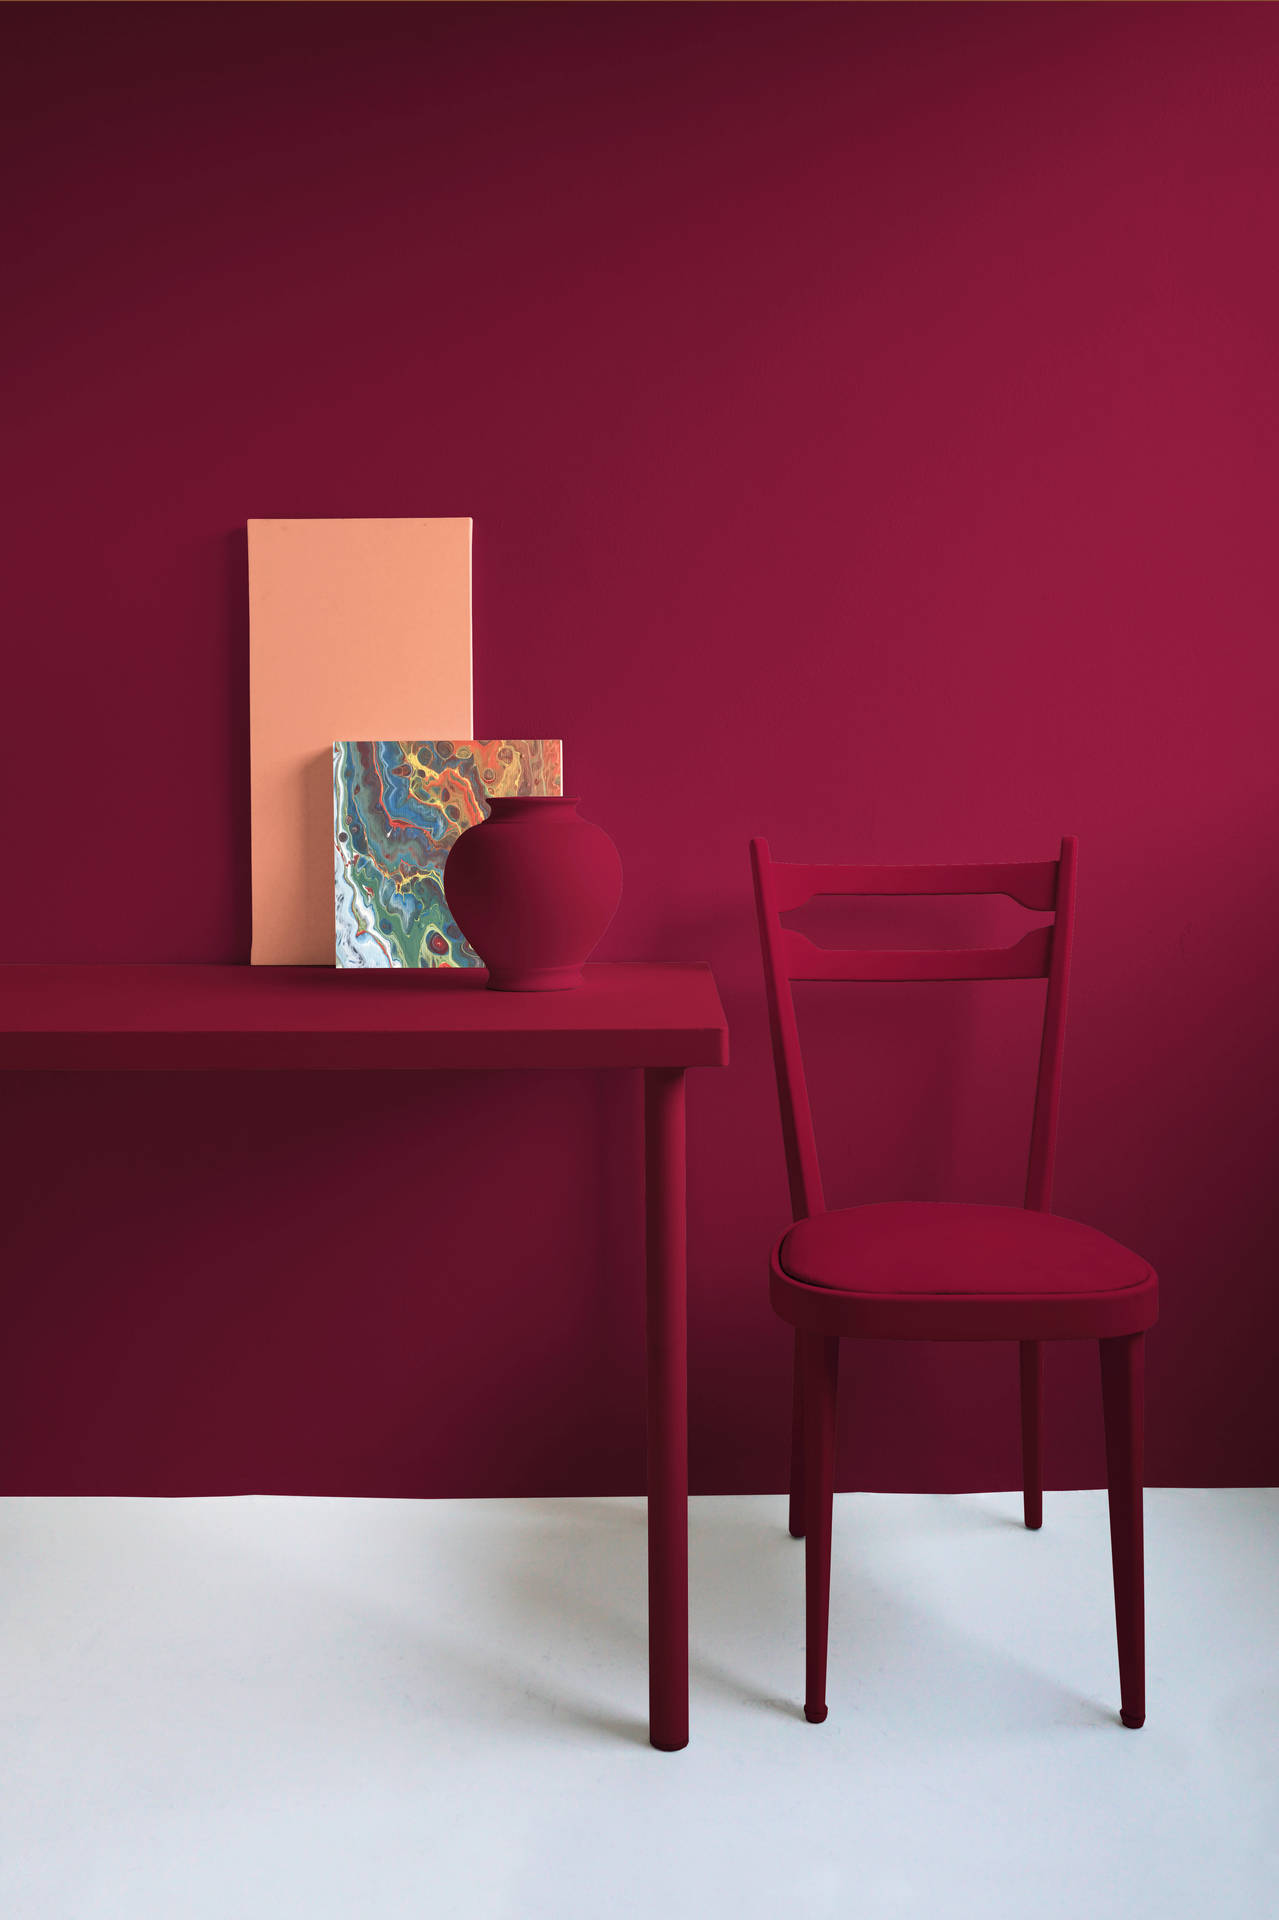 Magenta Furniture Against Magenta Wall Picture